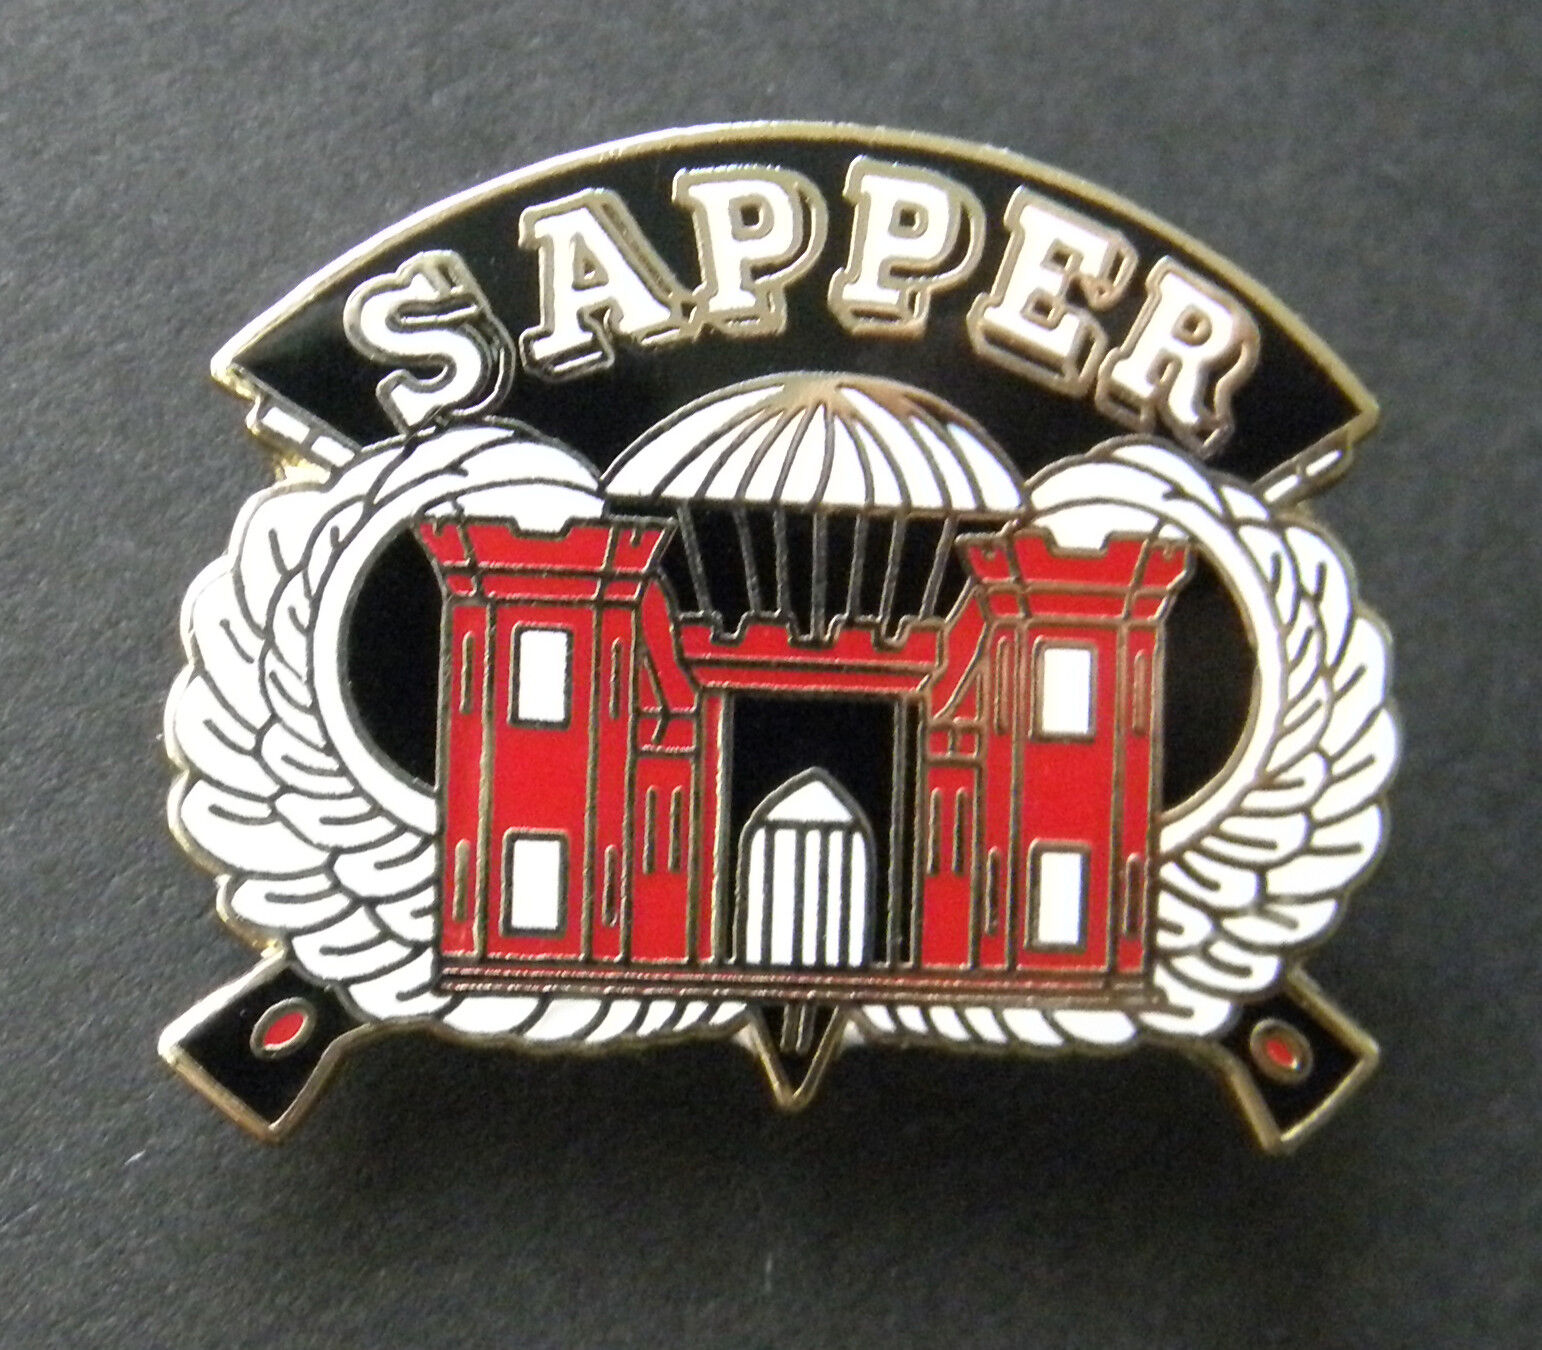 ARMY SAPPER ENGINEER AIRBORNE PARA LAPEL PIN BADGE 1.1 INCHES